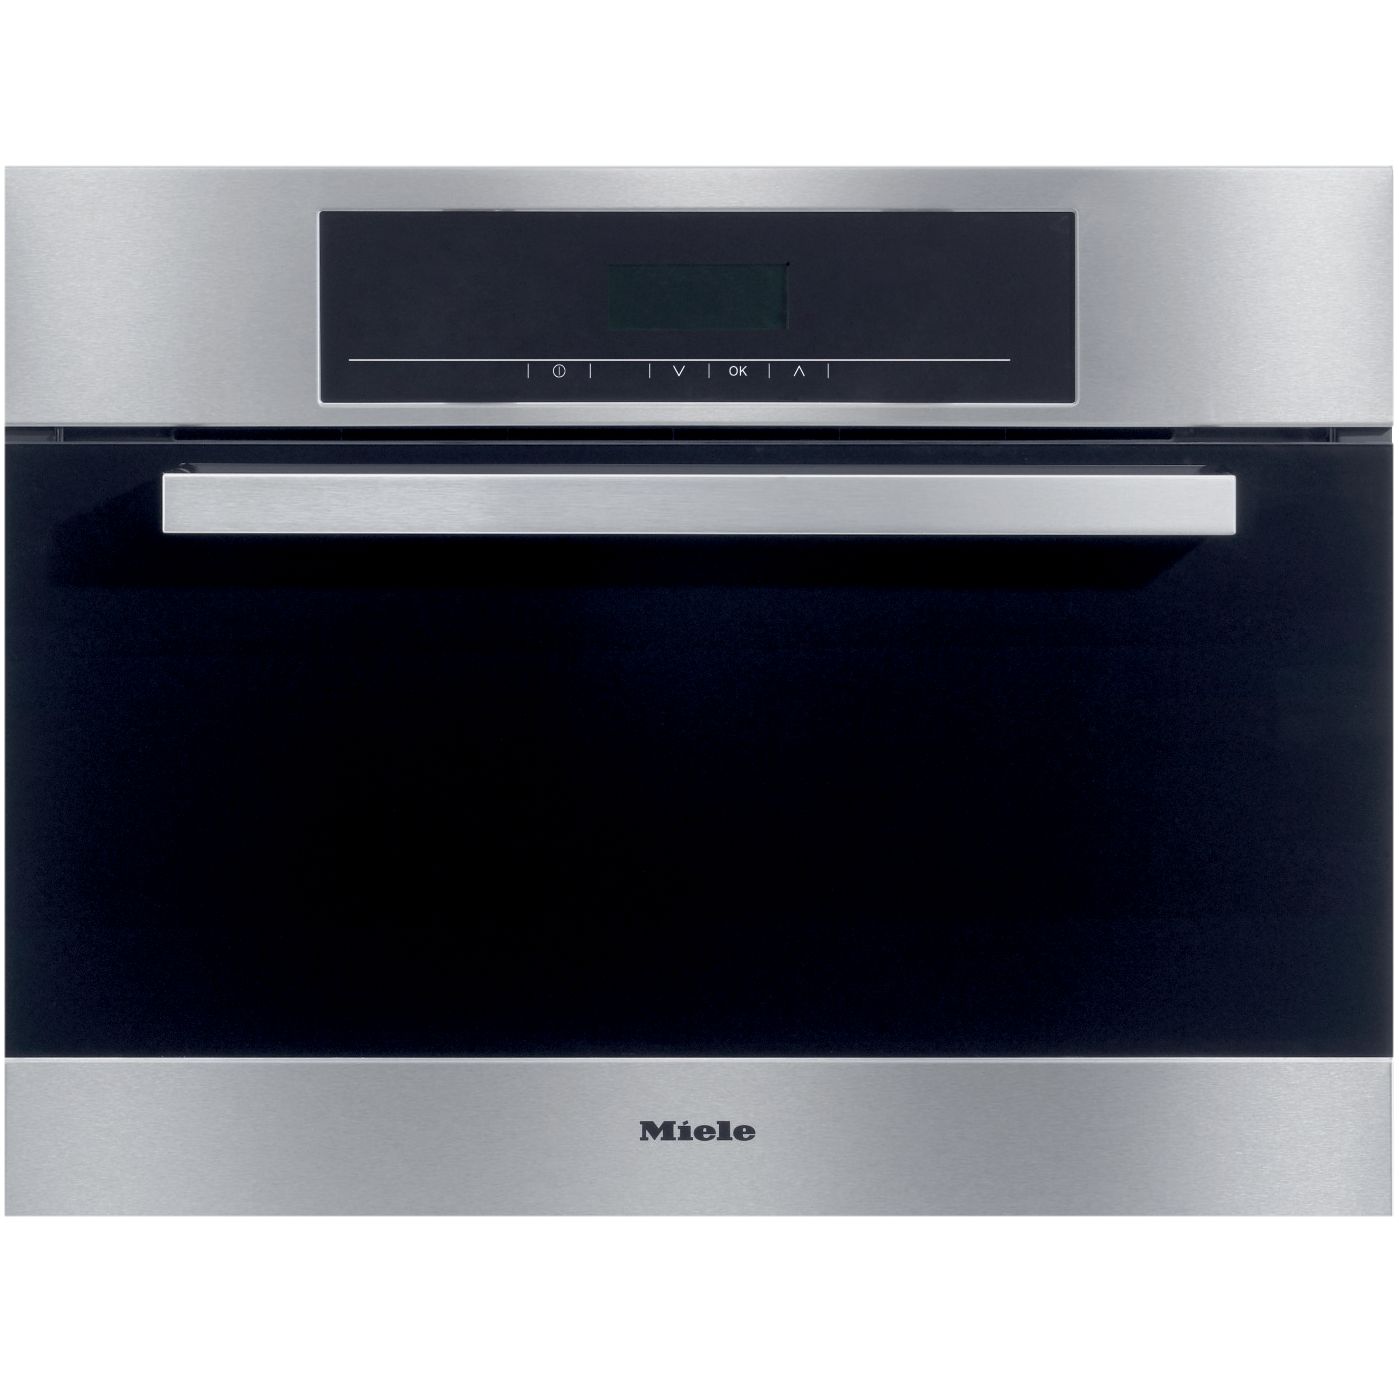 Miele DG5040 Built-in Compact Steam Oven, Stainless Steel at John Lewis